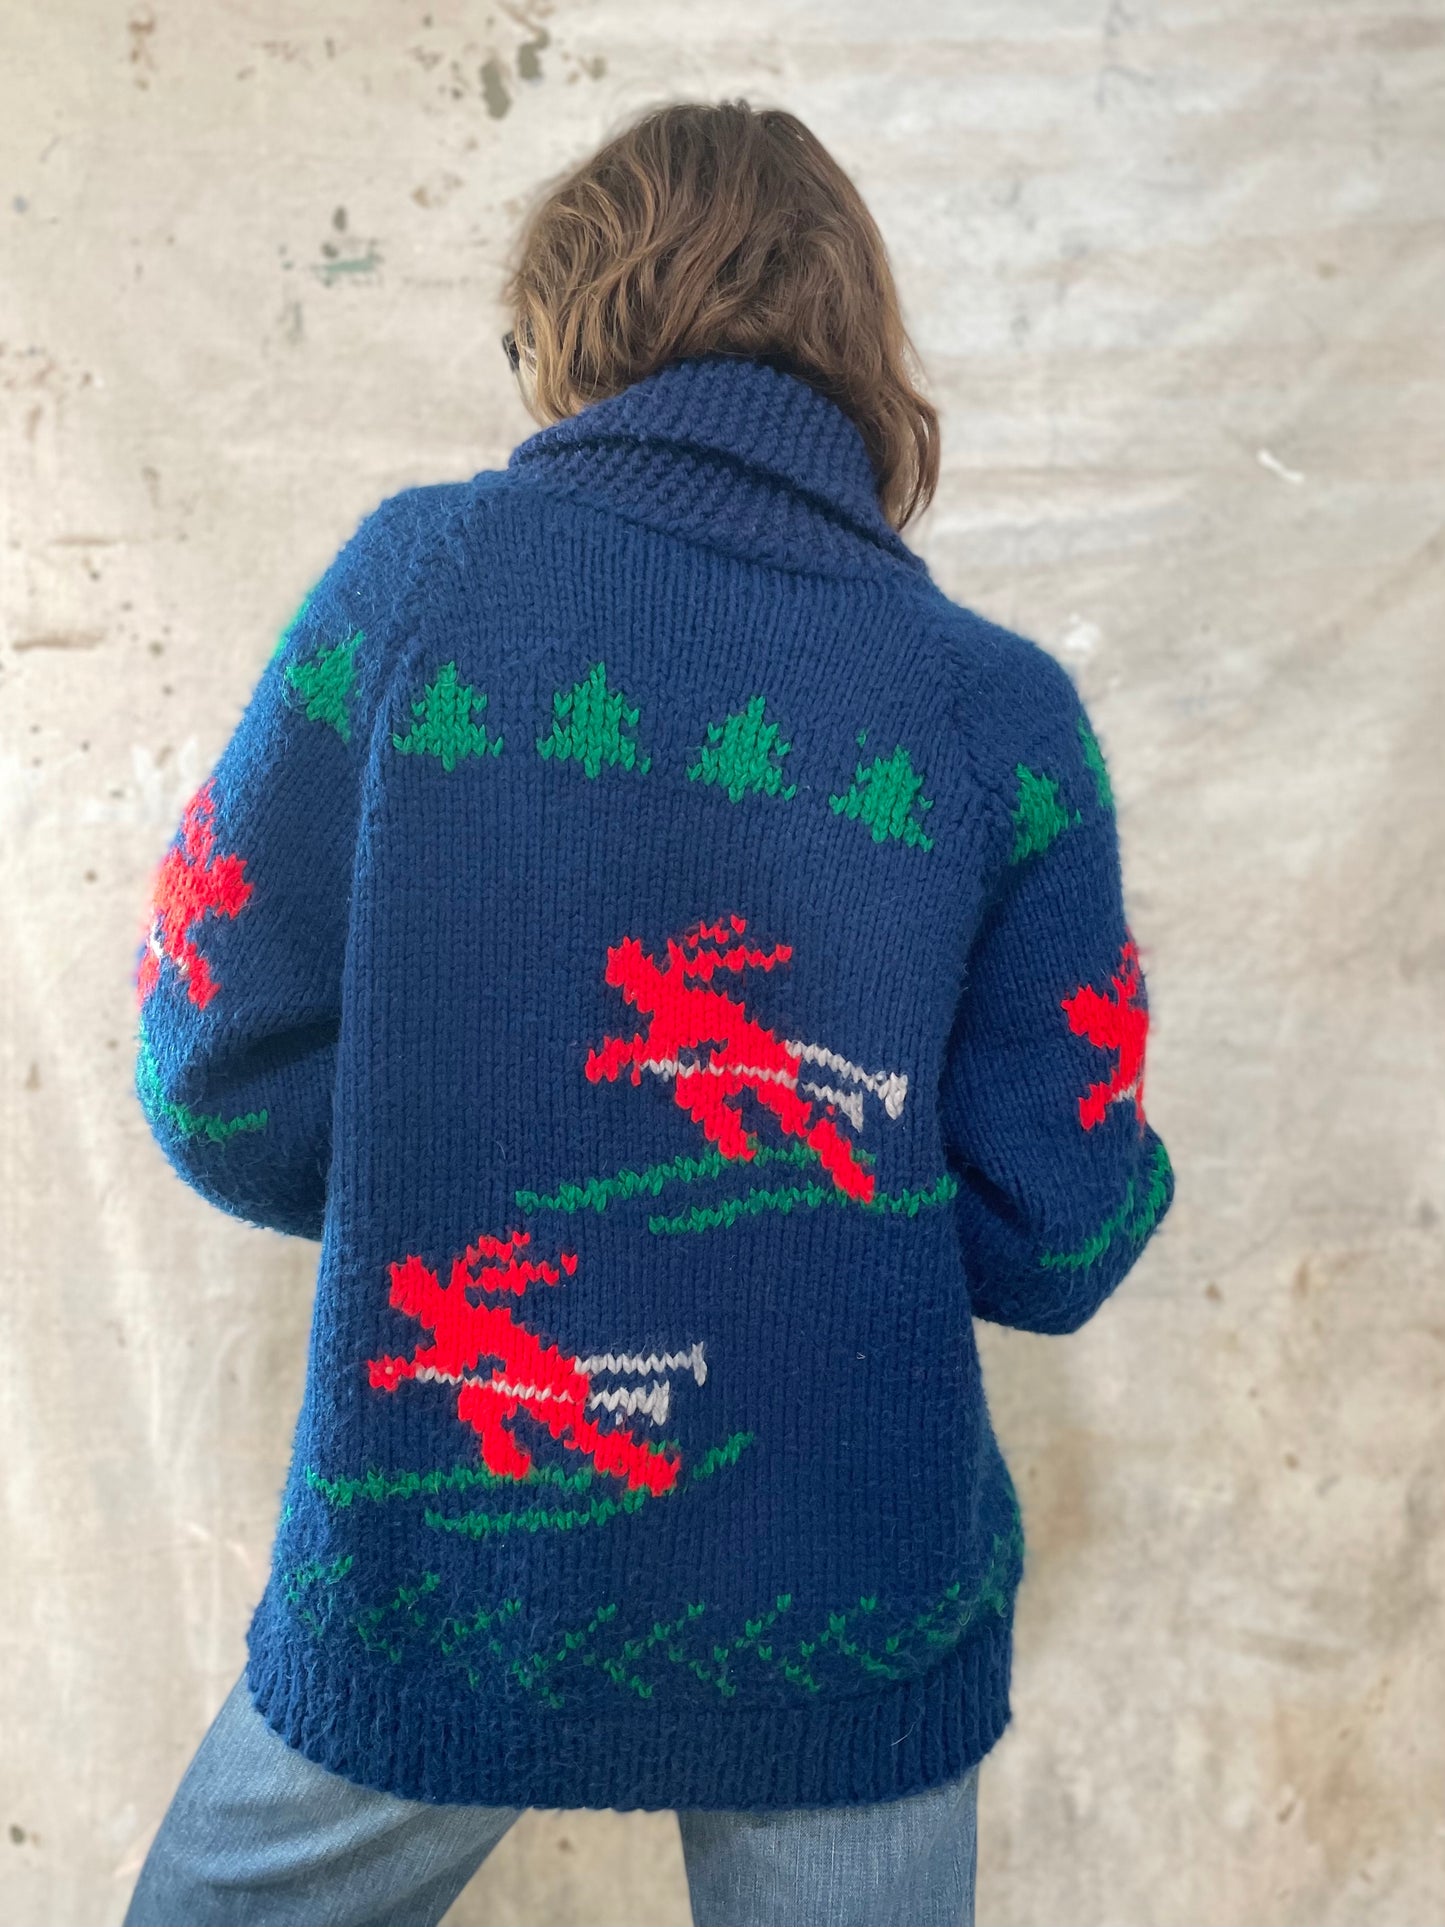 Mary Maxim “The Skiers” Hand Knit Sweater